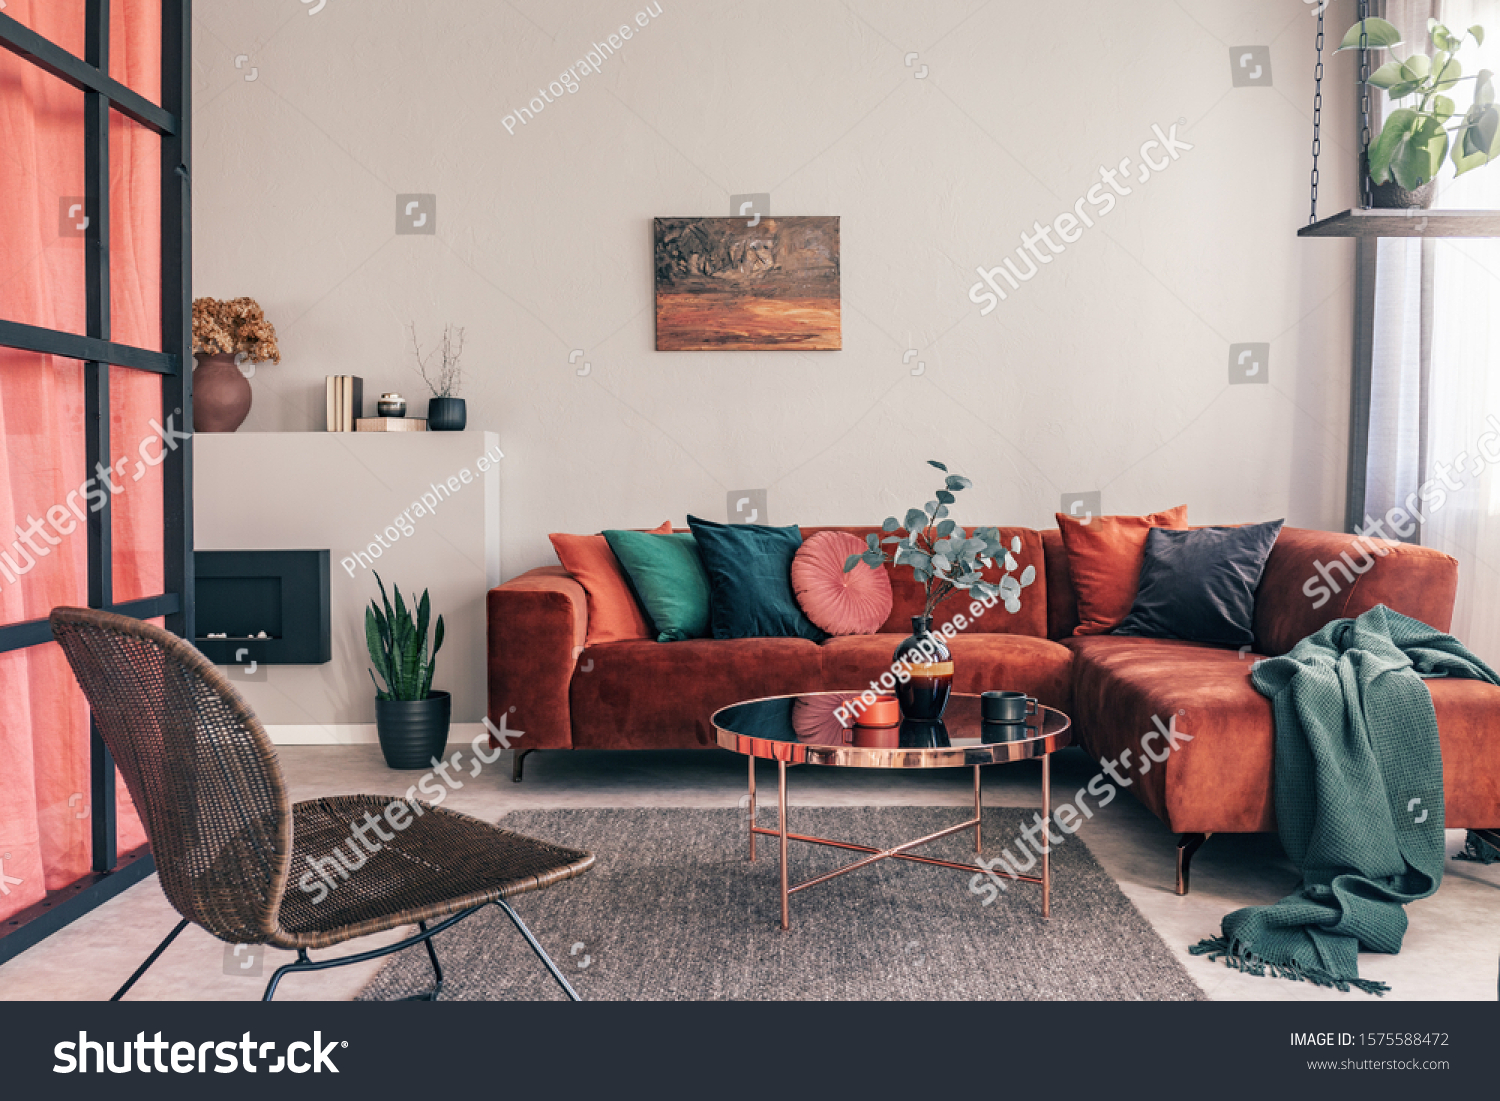 Real photo of a comfy living room interior with a round table on gray rug, wicker armchair and red corner sofa #1575588472